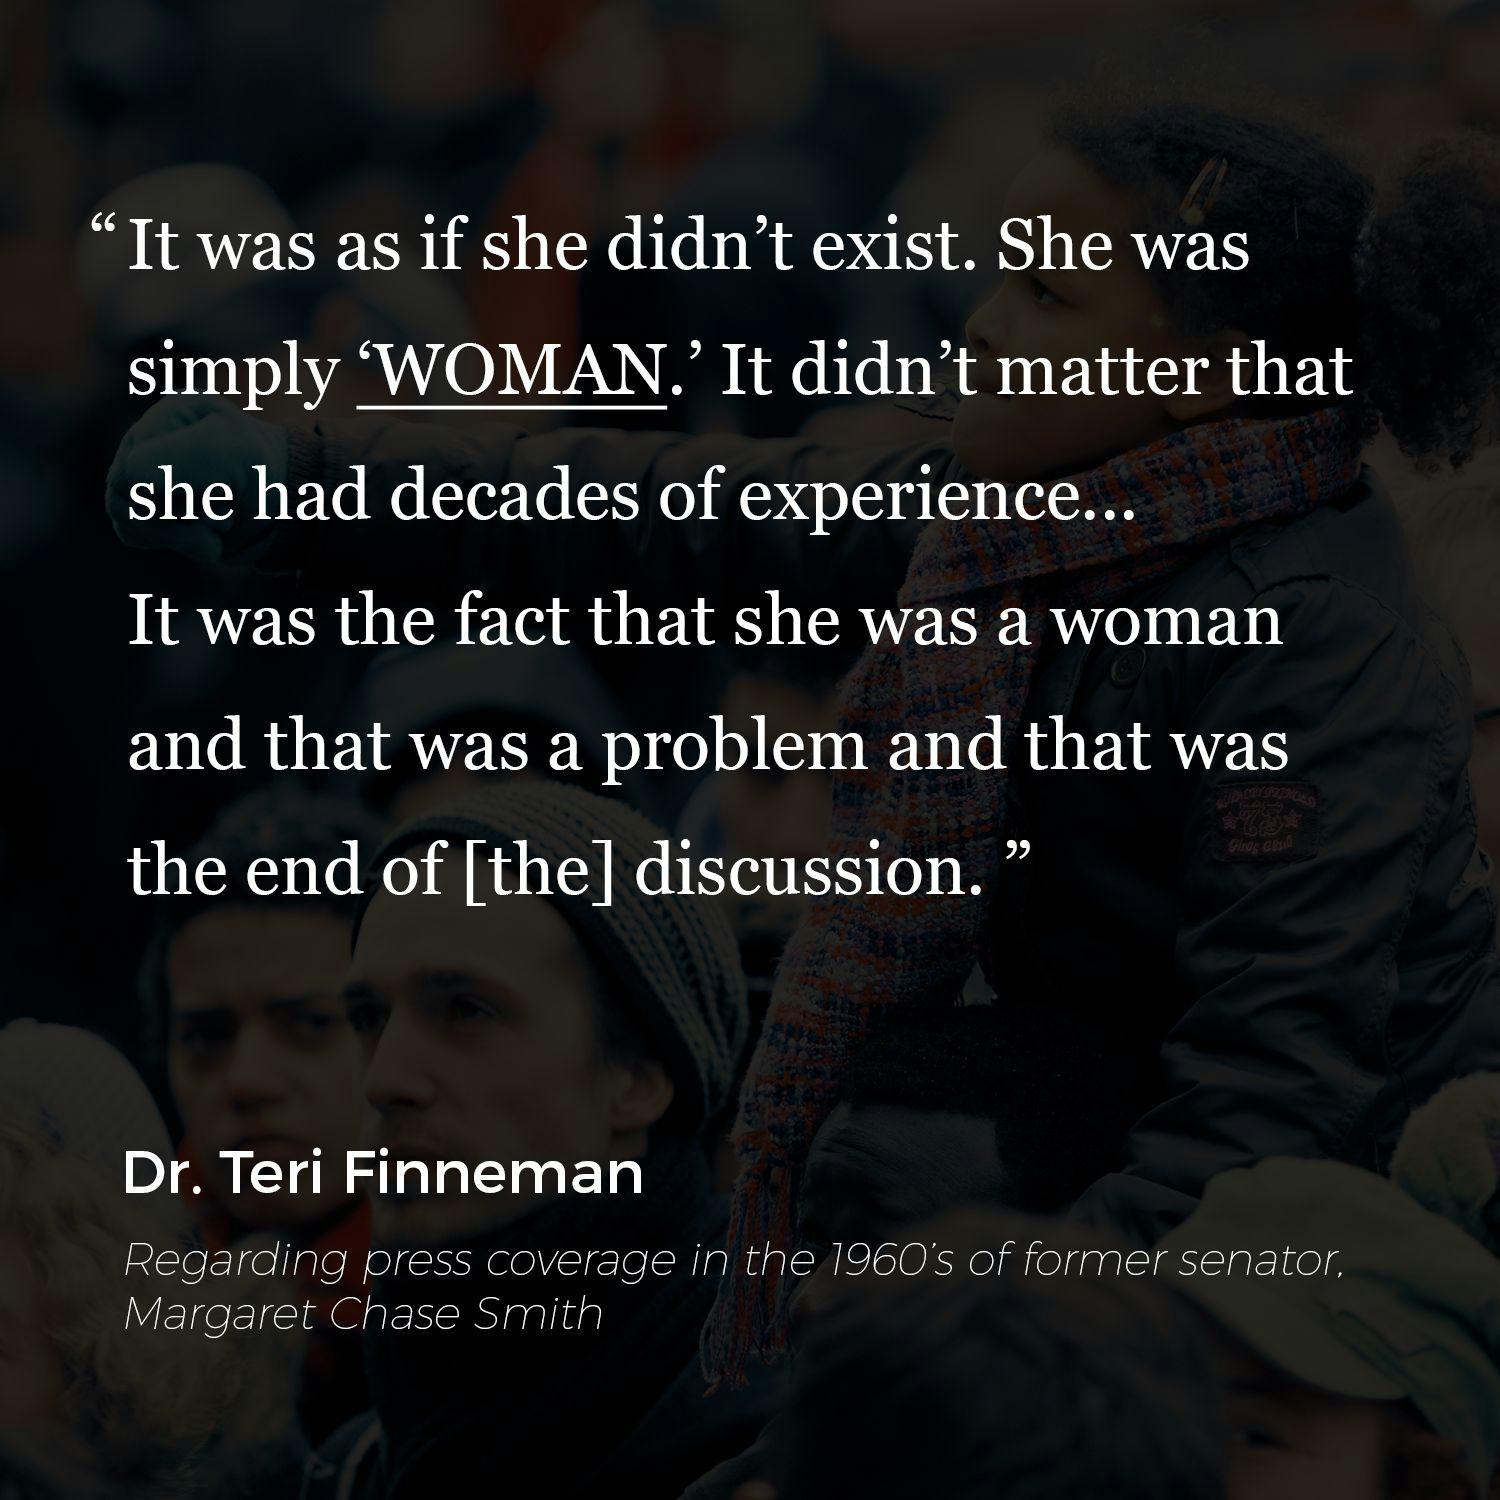 The Free-Love Candidate, Women Politicians & the Media with Teri Finneman